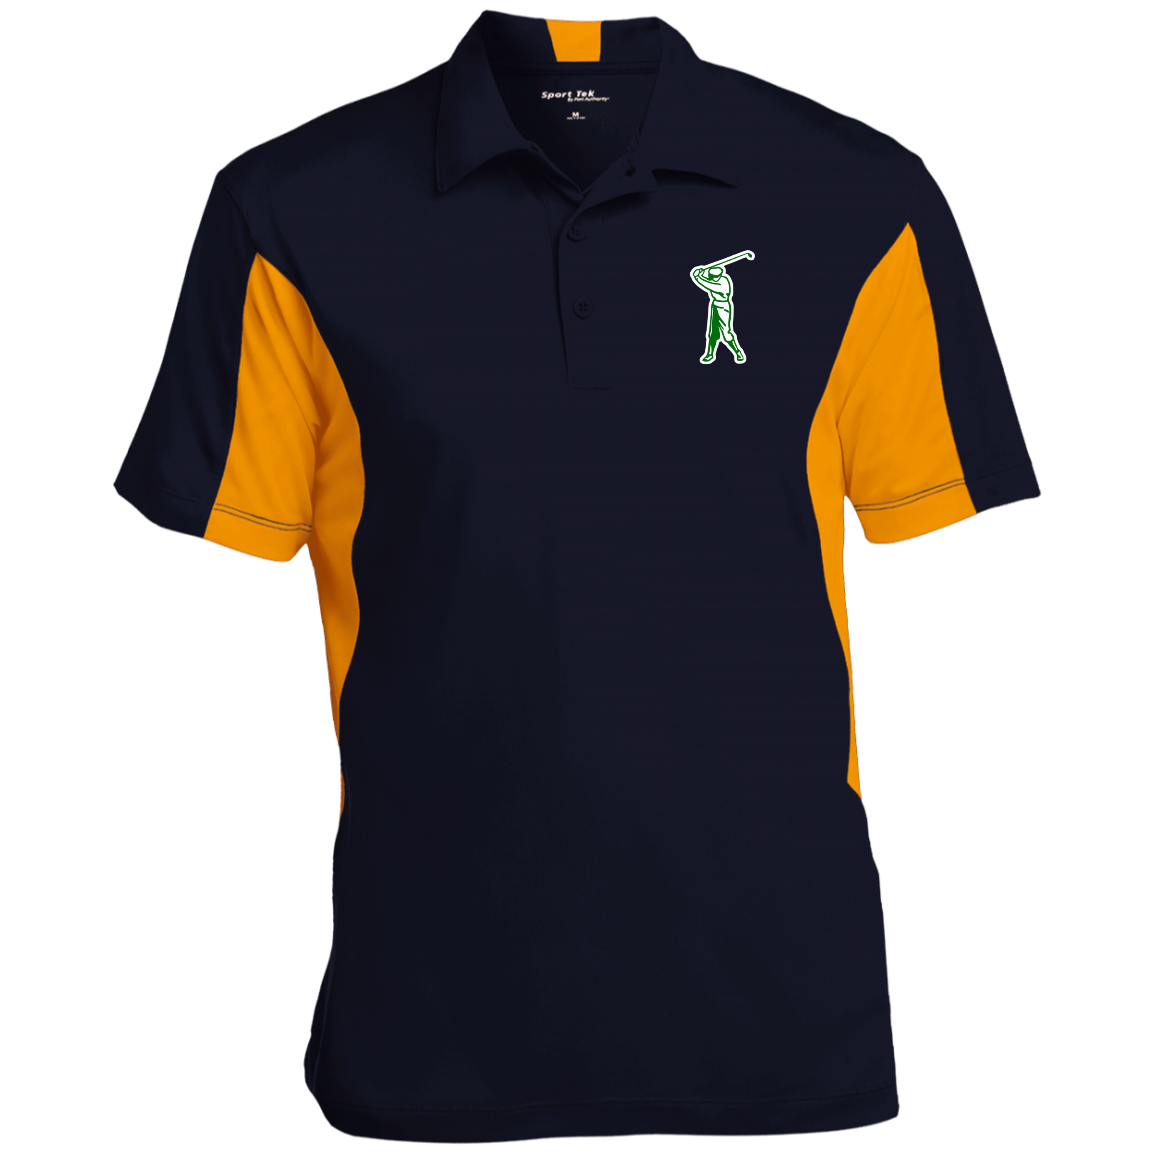 Tee Time Men's Colorblock Performance Polo